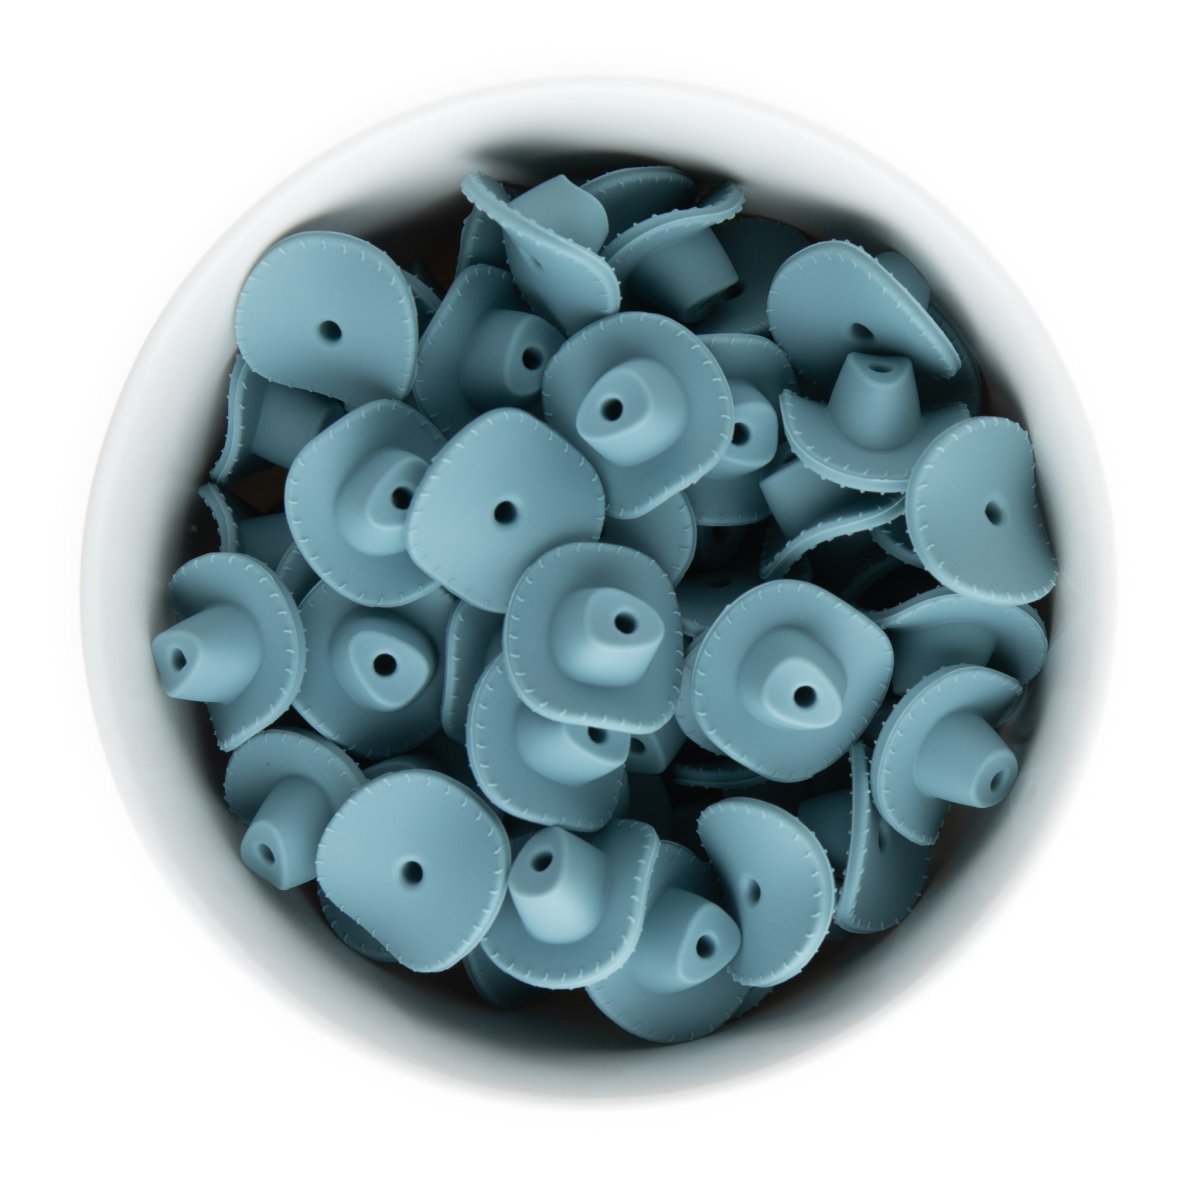 Silicone Focal Beads Cowboy Hats Dusky Blue from Cara & Co Craft Supply